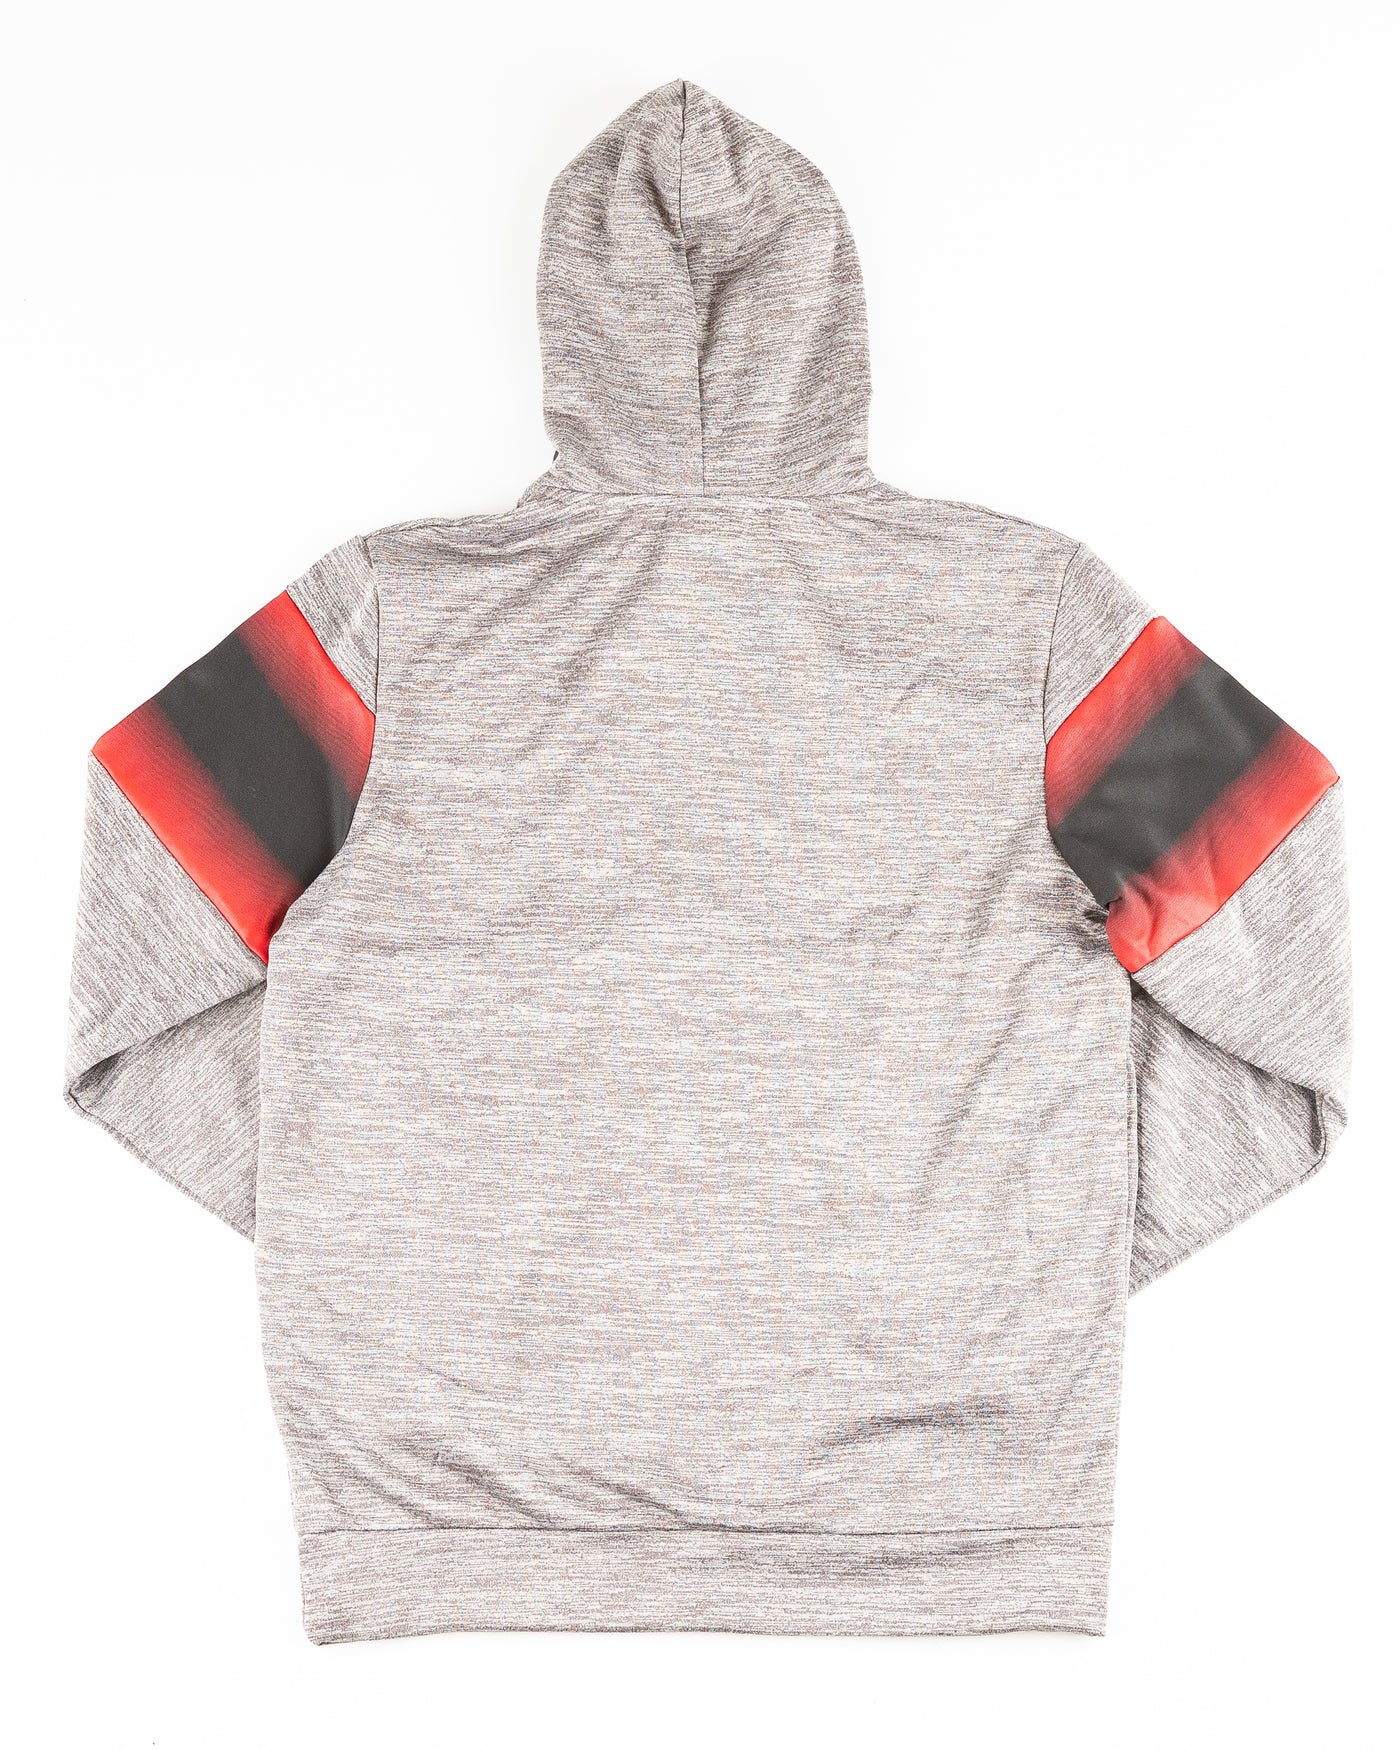 grey Colosseum hoodie with Rockford IceHogs wordmark across chest - back lay flat